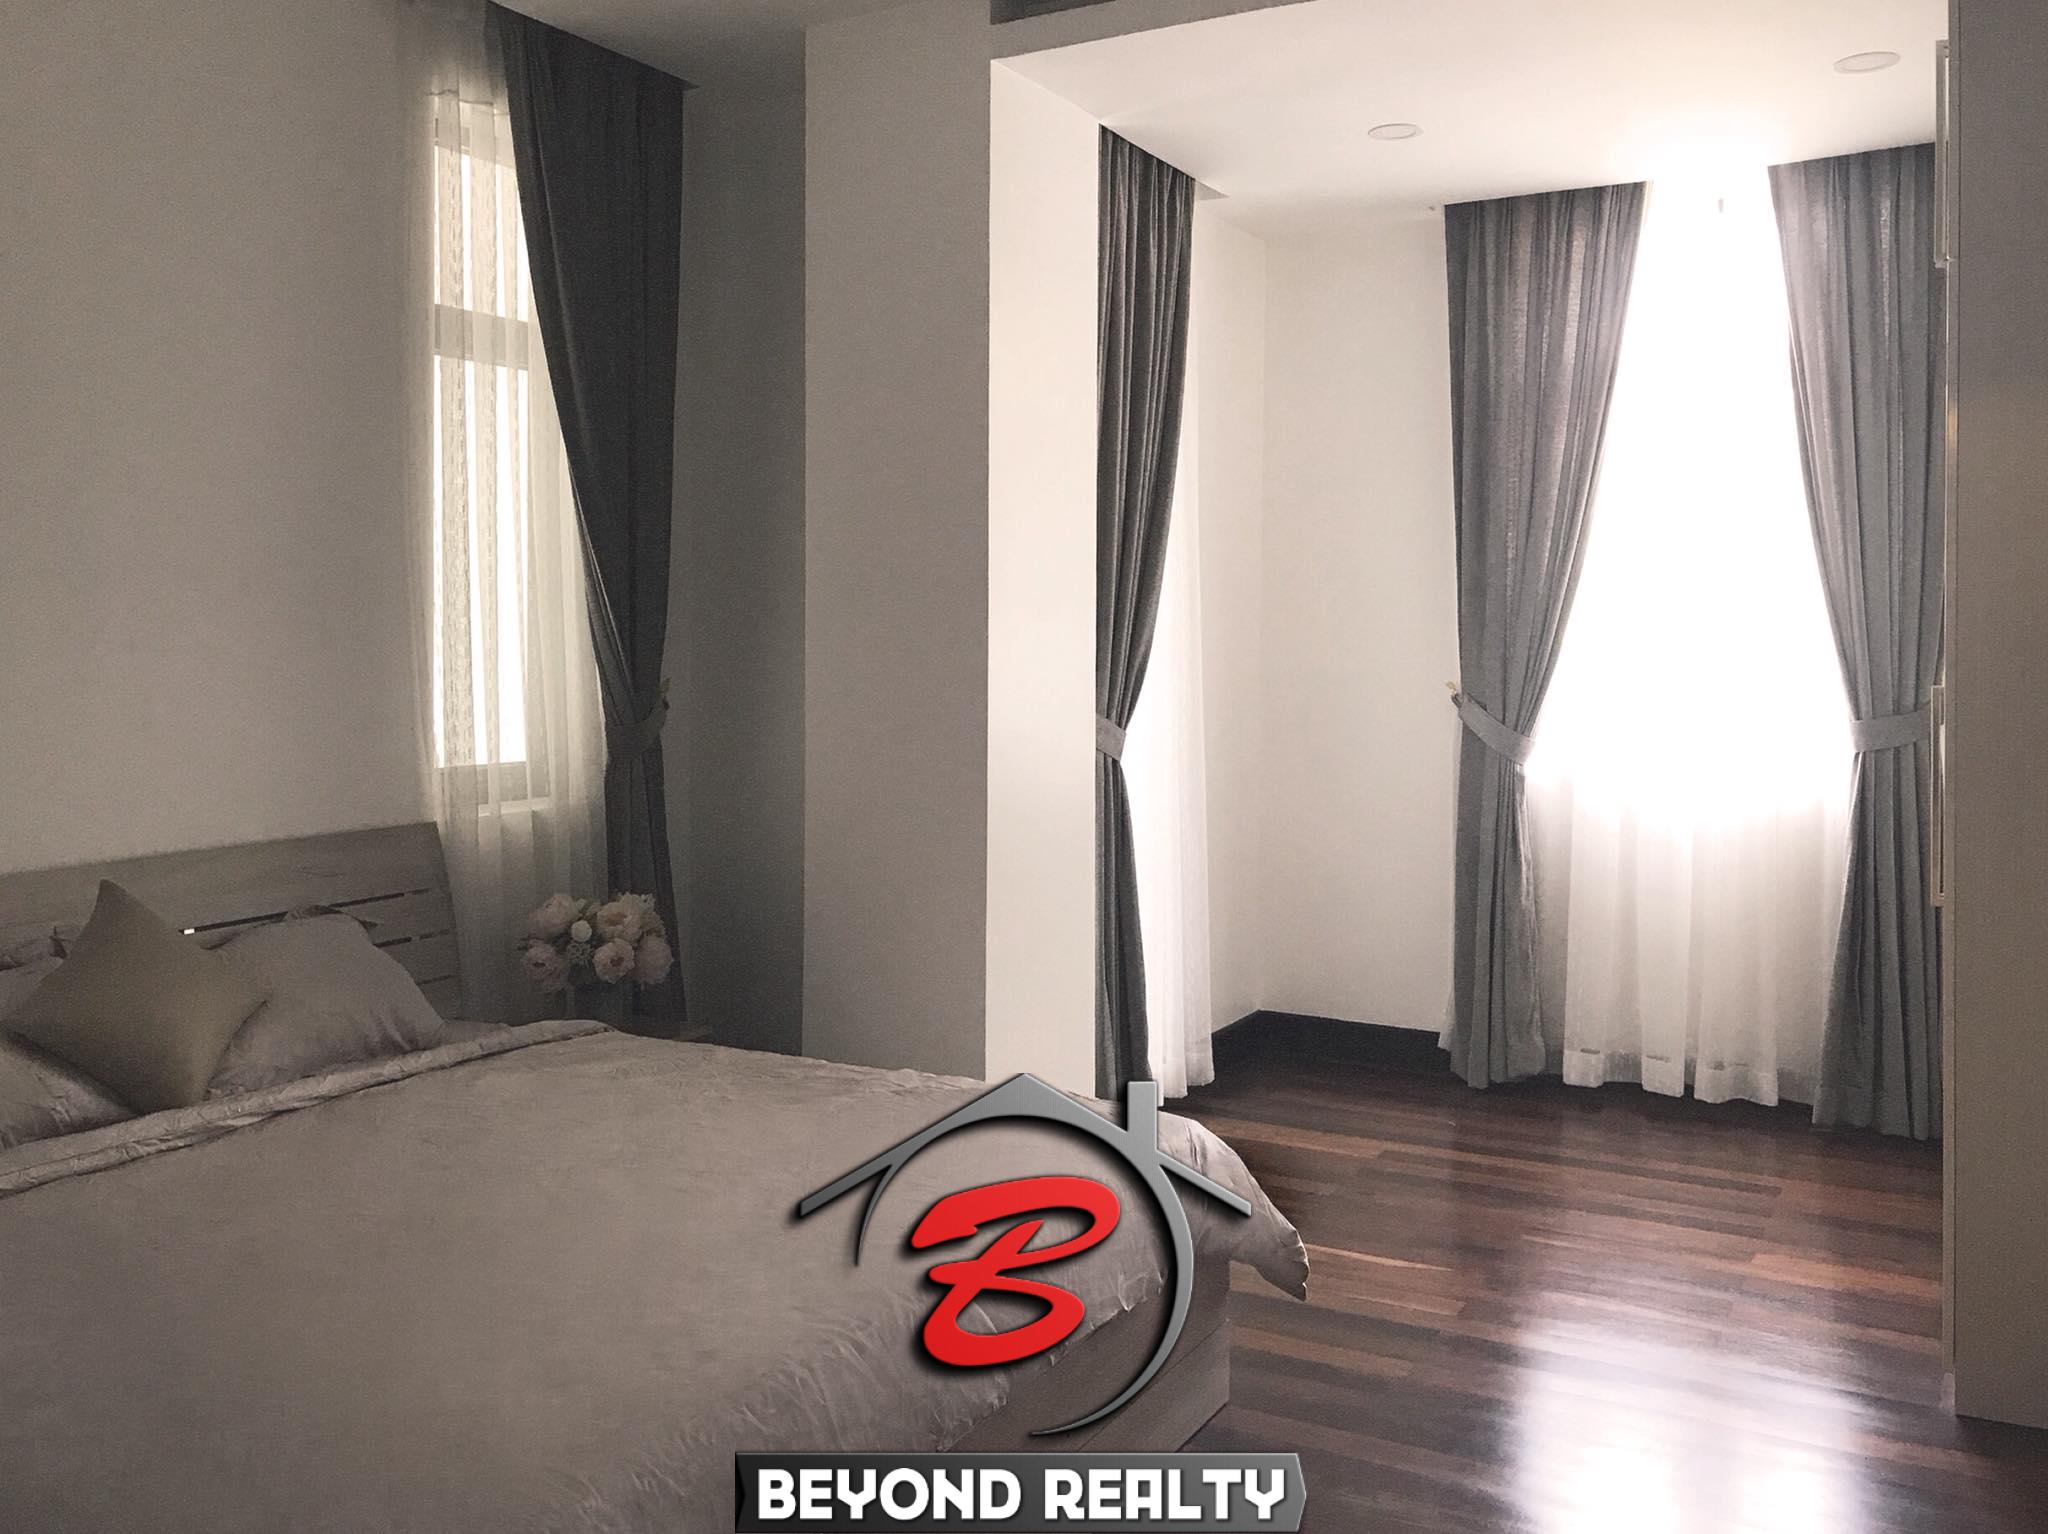 the bedroom of the 1br luxury serviced condo for rent in Sangkat Srah Chak in Daun Penh in Phnom Penh Cambodia